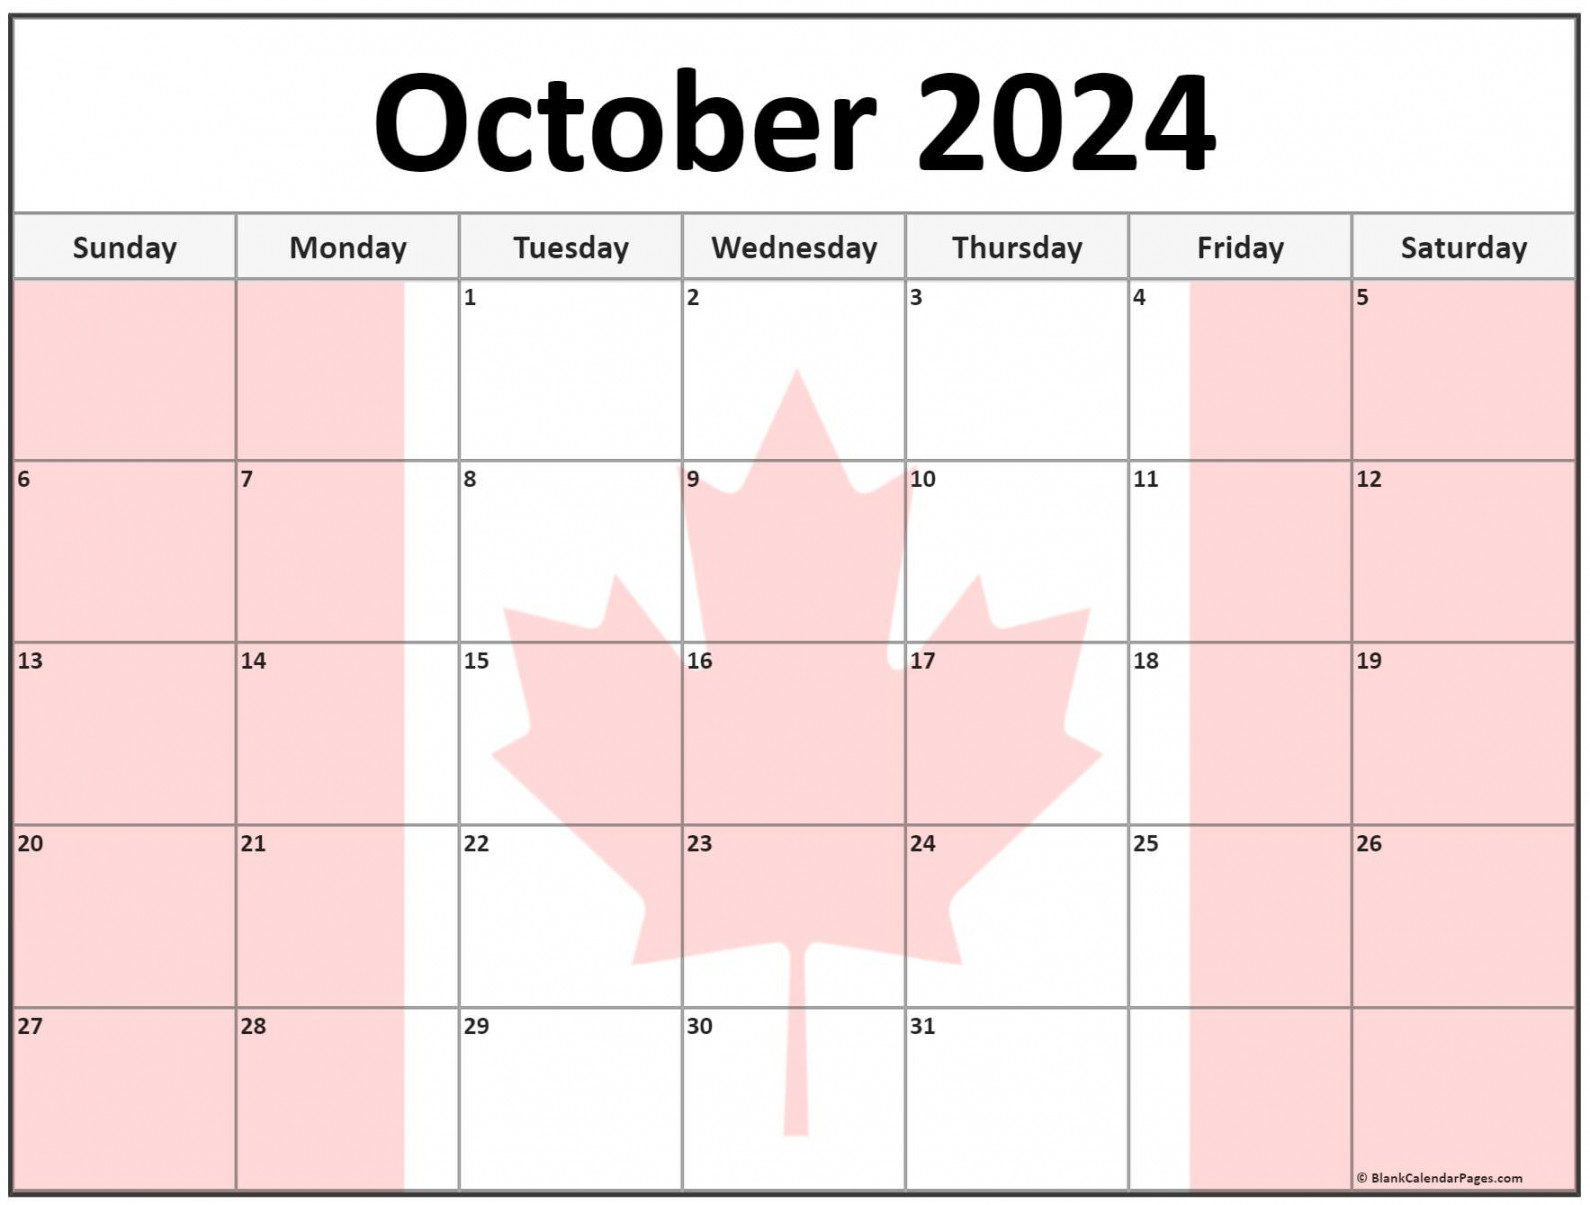 Collection of October  photo calendars with image filters.